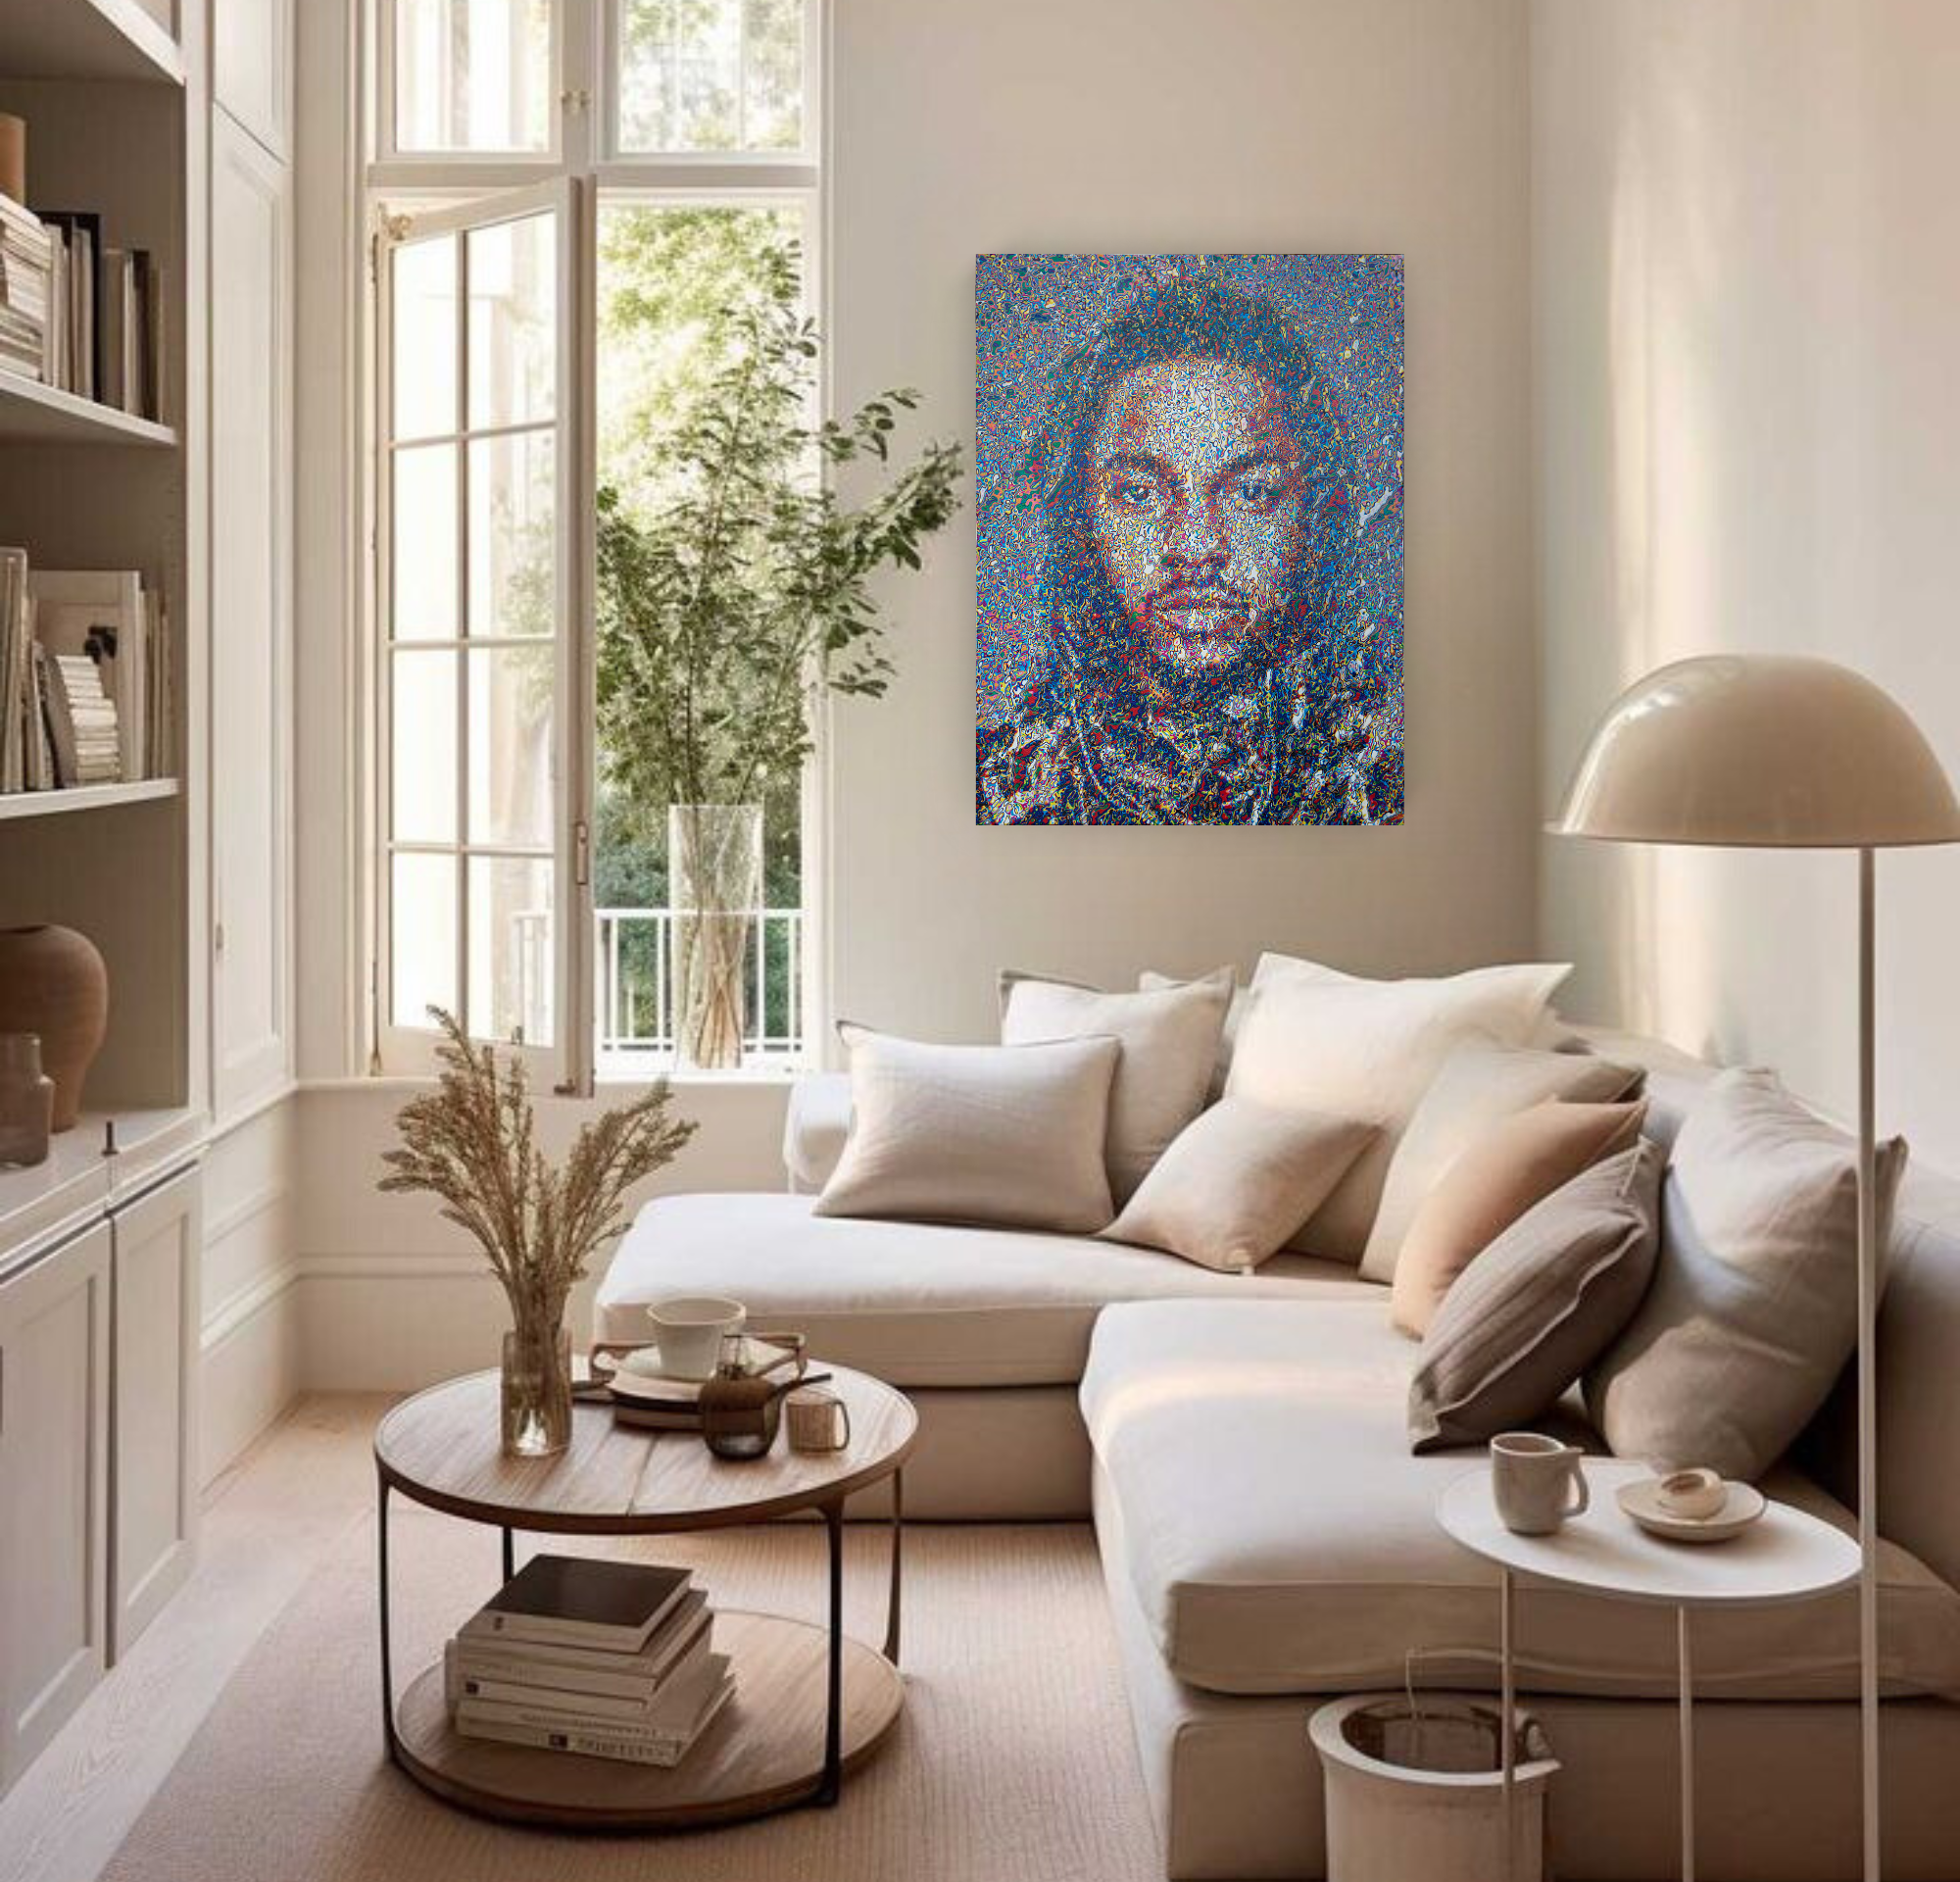 Kendrick, Exclusive Limited Edition on Canvas Queen Baeleit Art